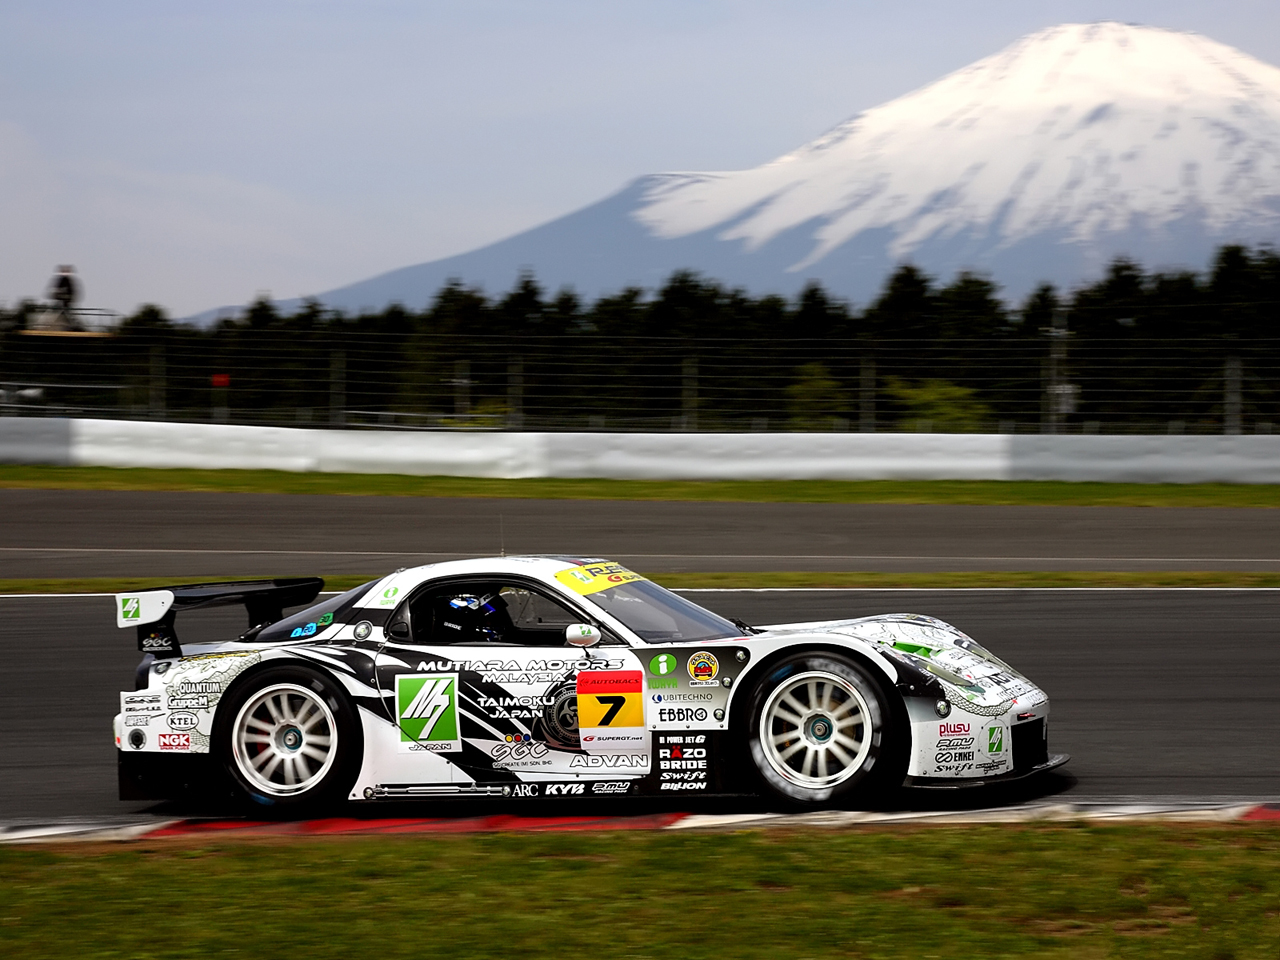 78 Super GT Racing HD Wallpapers | Backgrounds - Wallpaper Abyss